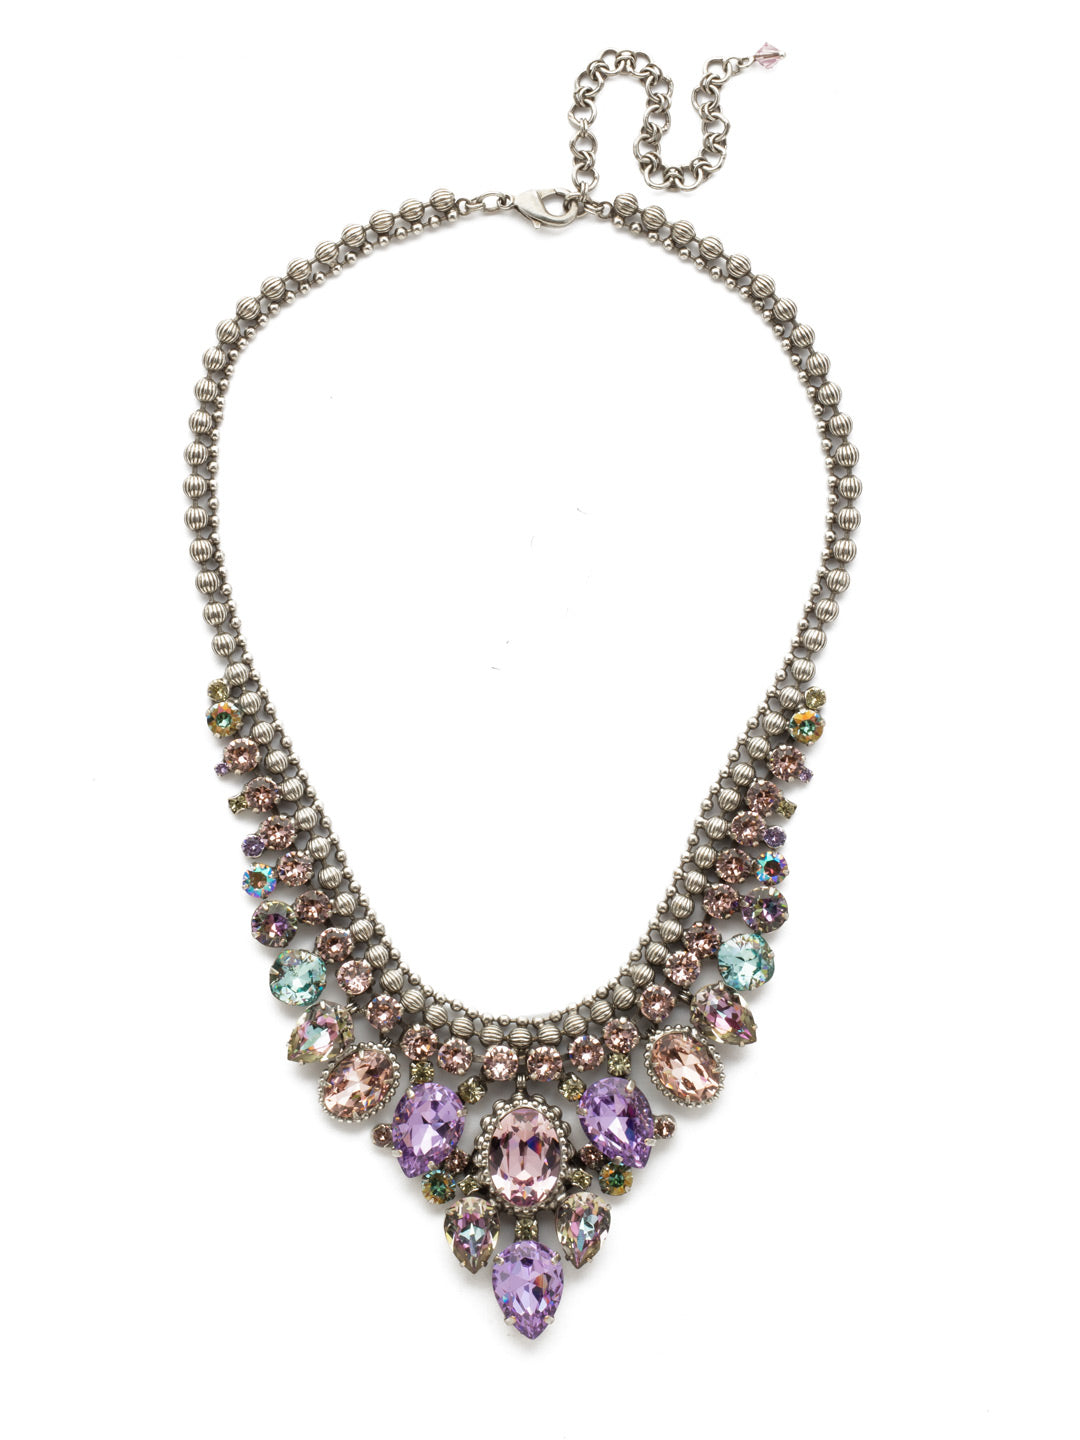 Protea Statement Necklace - NDQ3ASLPA - If you feel that bold is better, Protea is the necklace for you! With en elegantly edged chain and crystal for days, this statement-making style pairs perfectly with everything from your favorite party dress to jeans and a sweater!